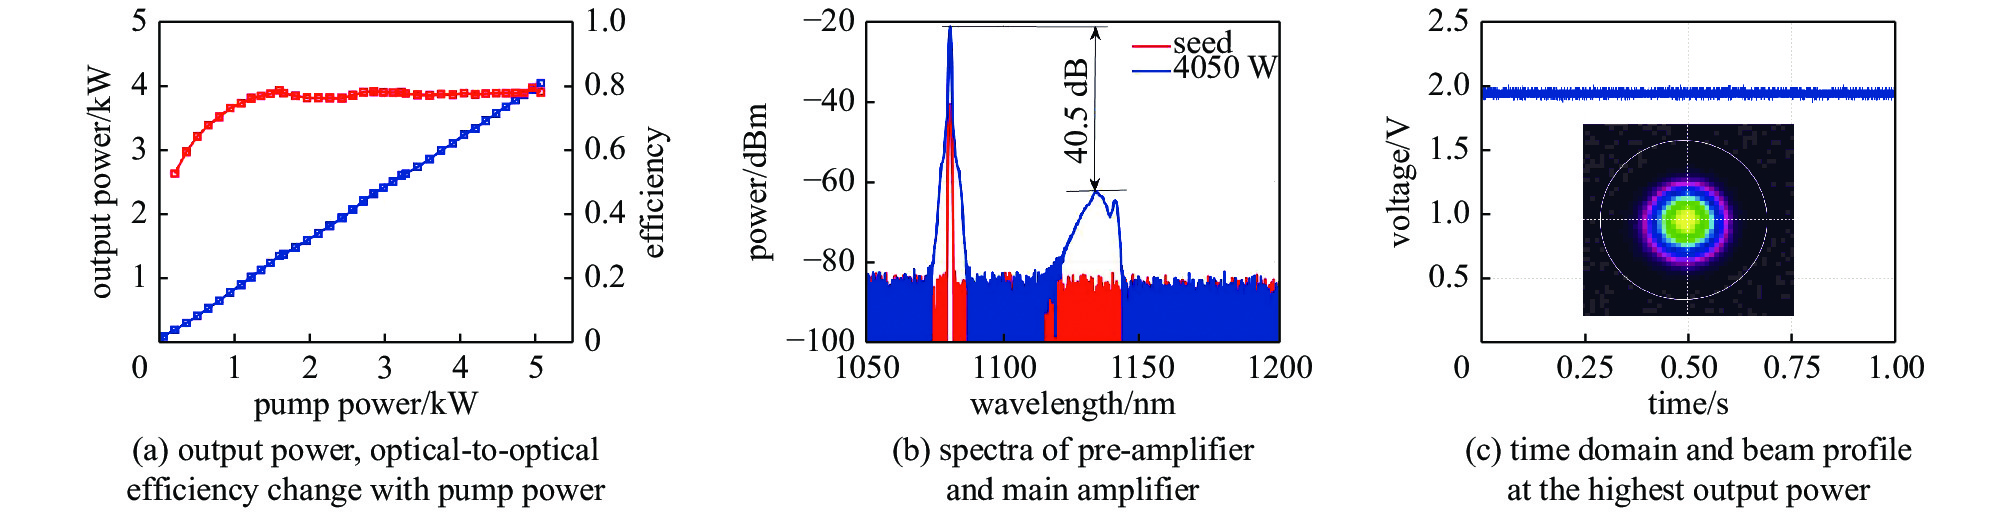 Experimental results of the single-end pumped narrow linewidth fiber laser